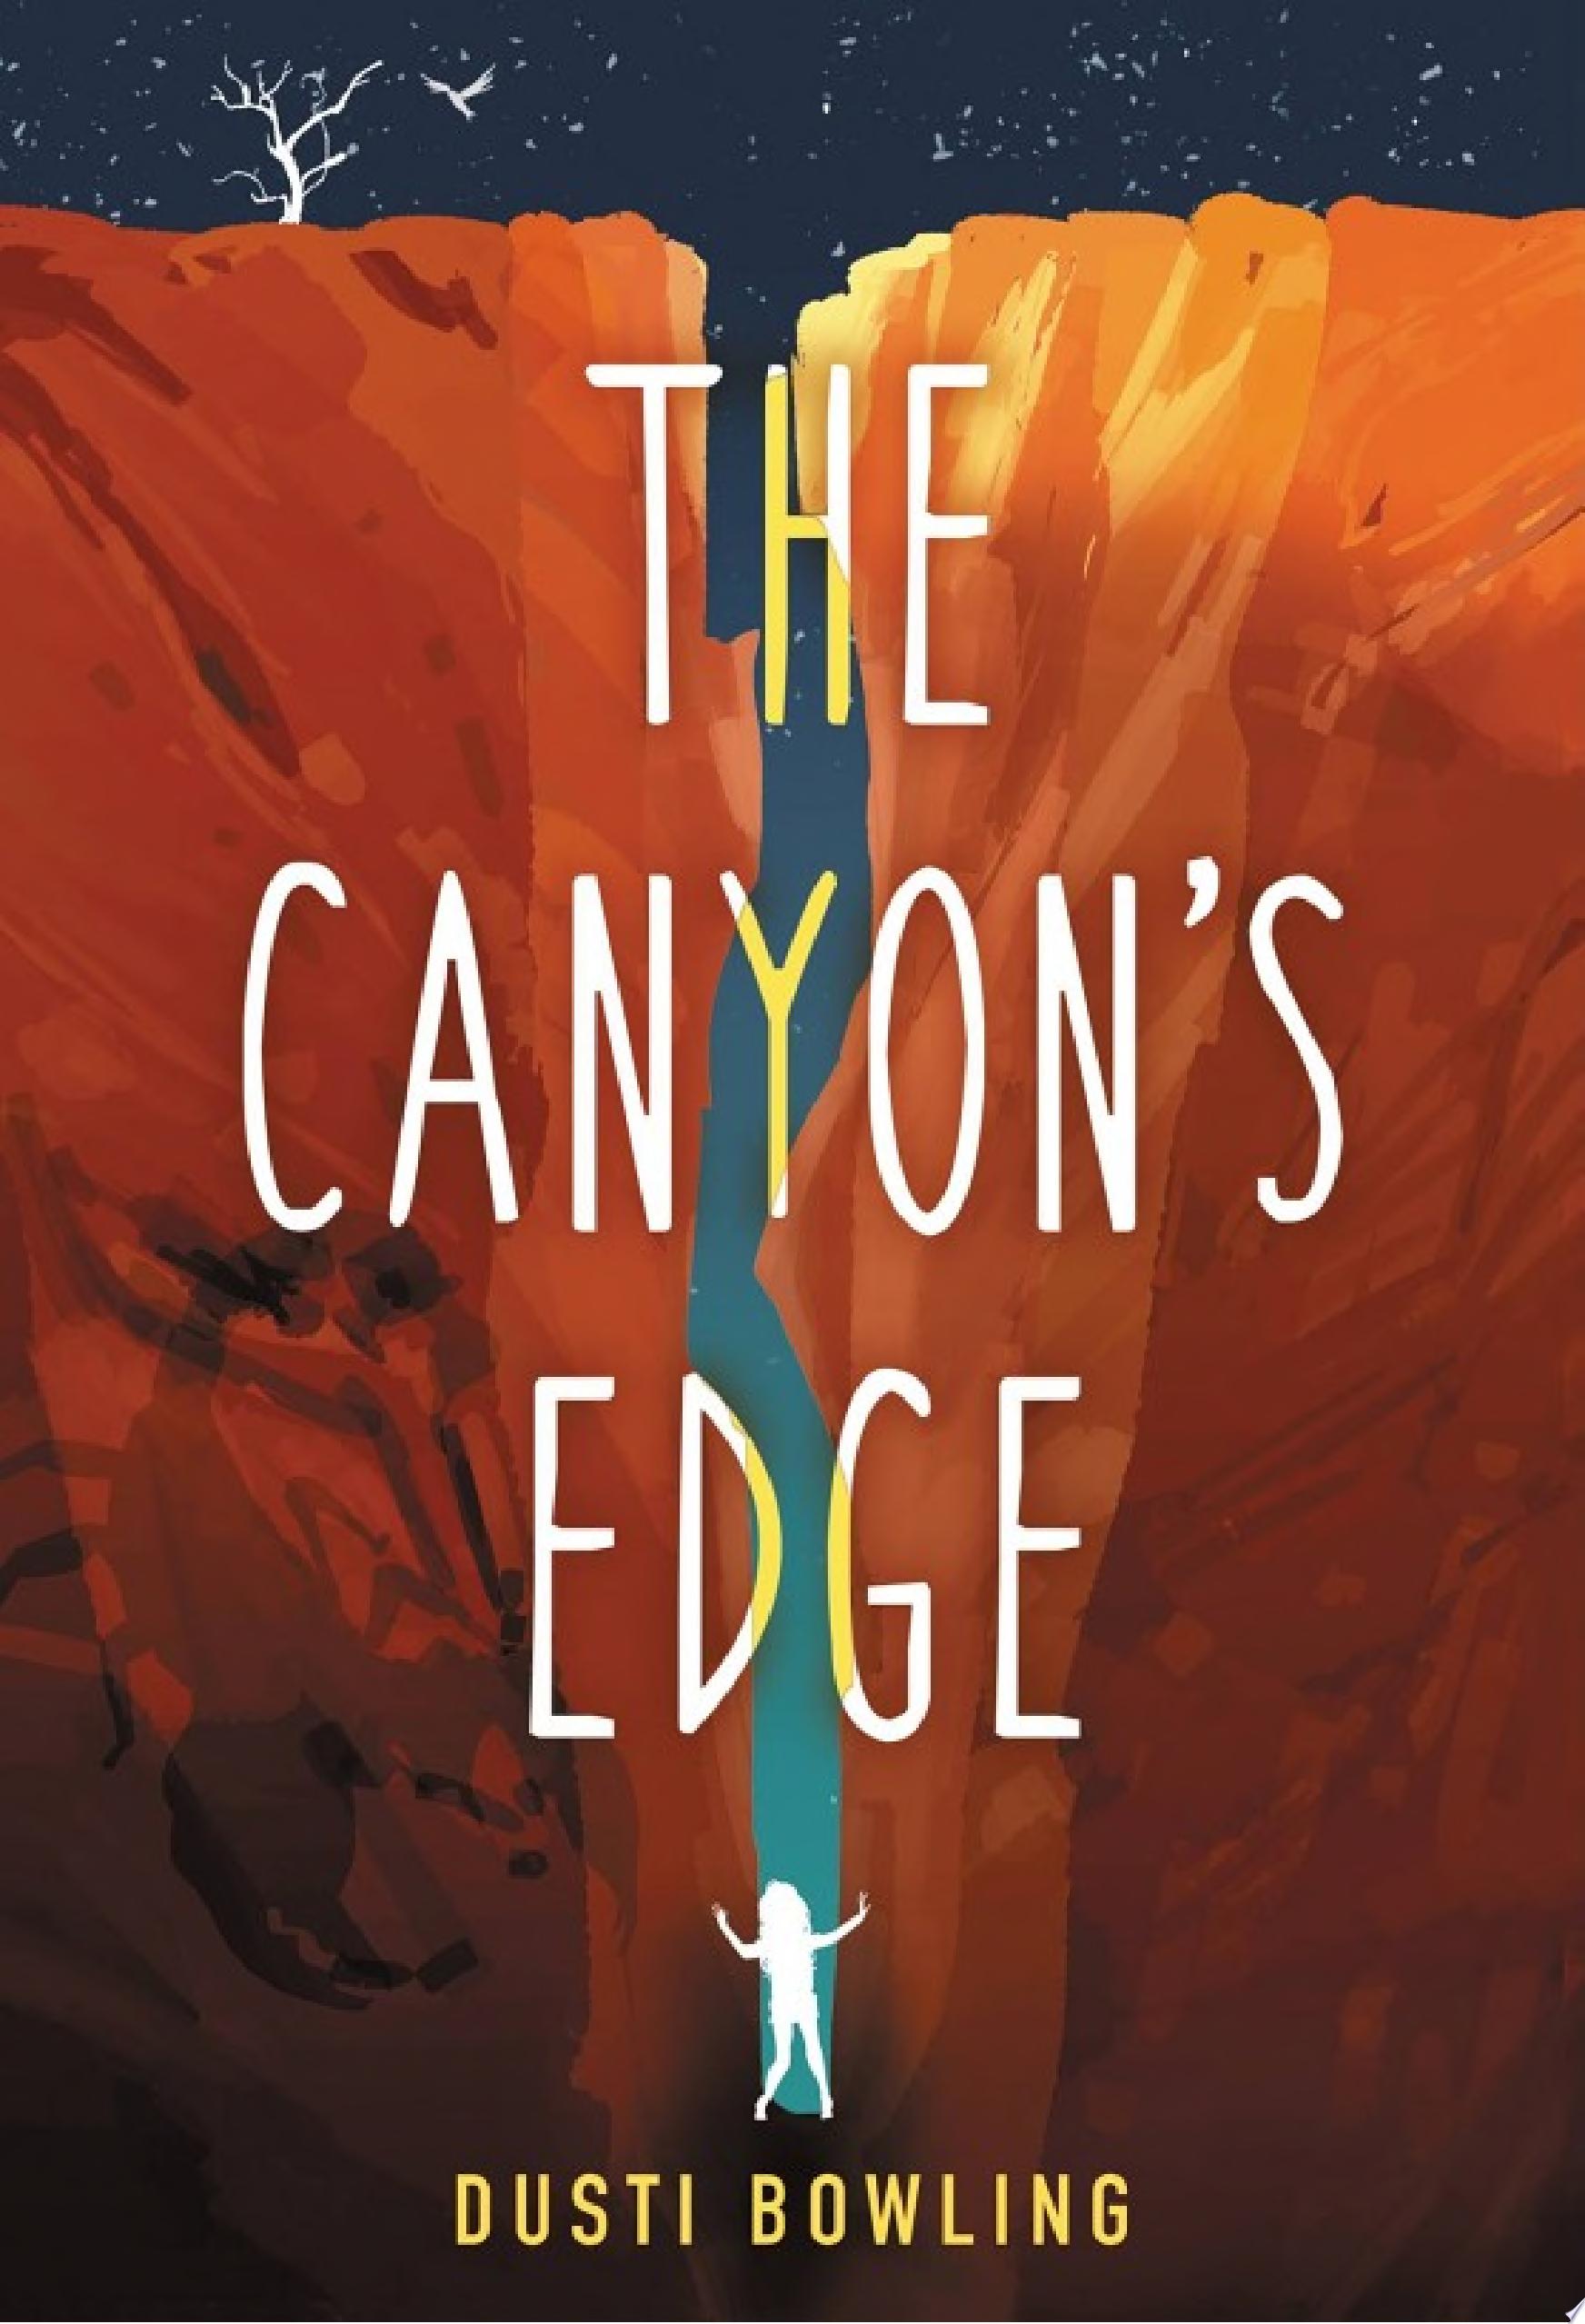 Image for "The Canyon's Edge"